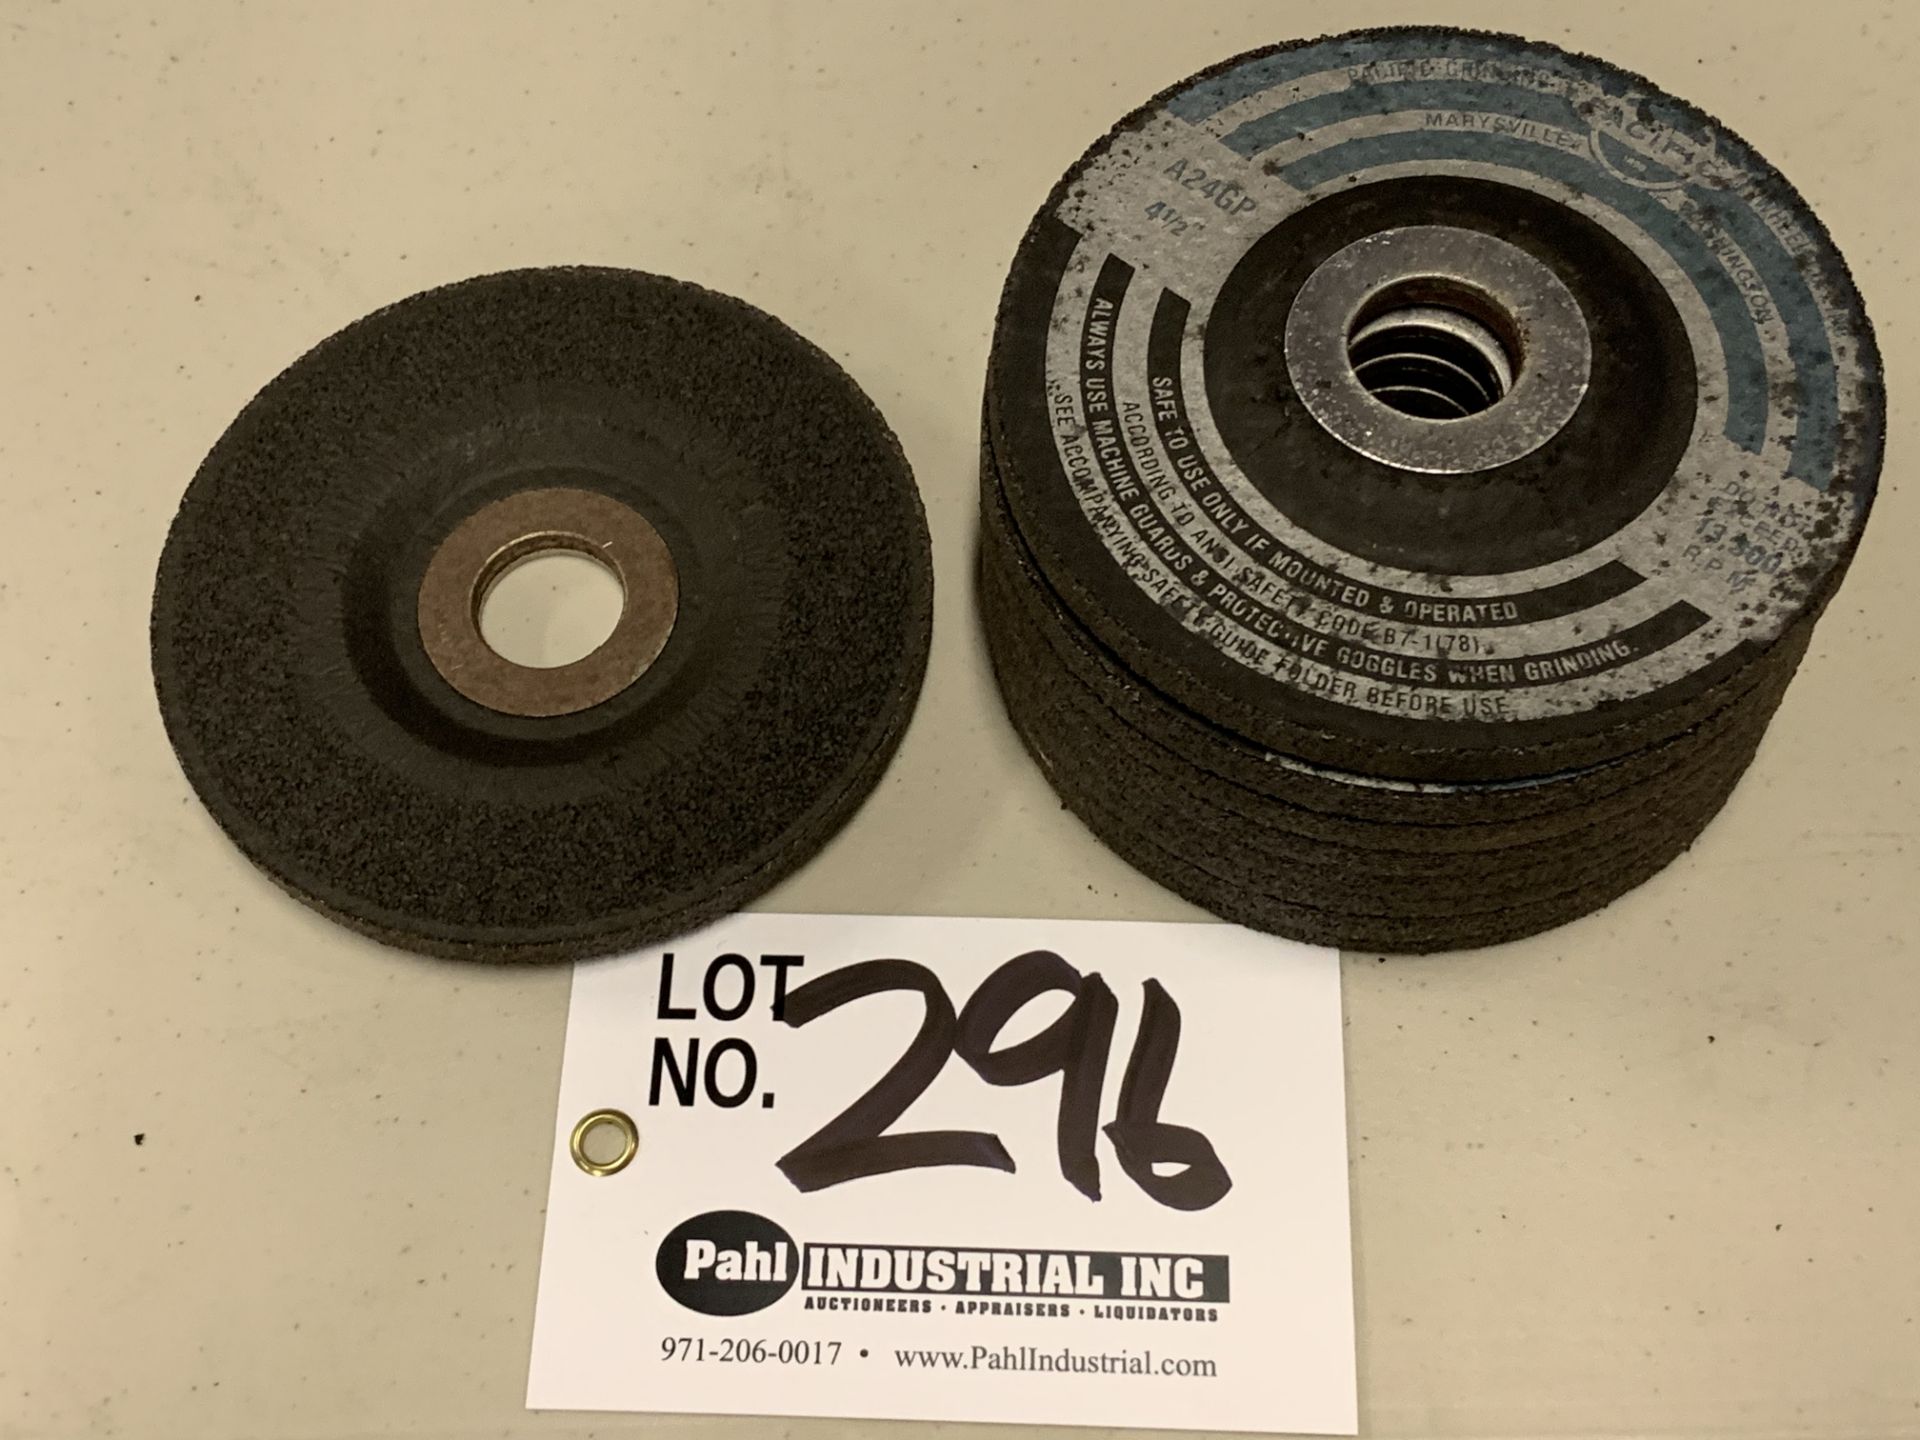 (9) New Pacific 4 1/2" Grinding Wheels A24GP